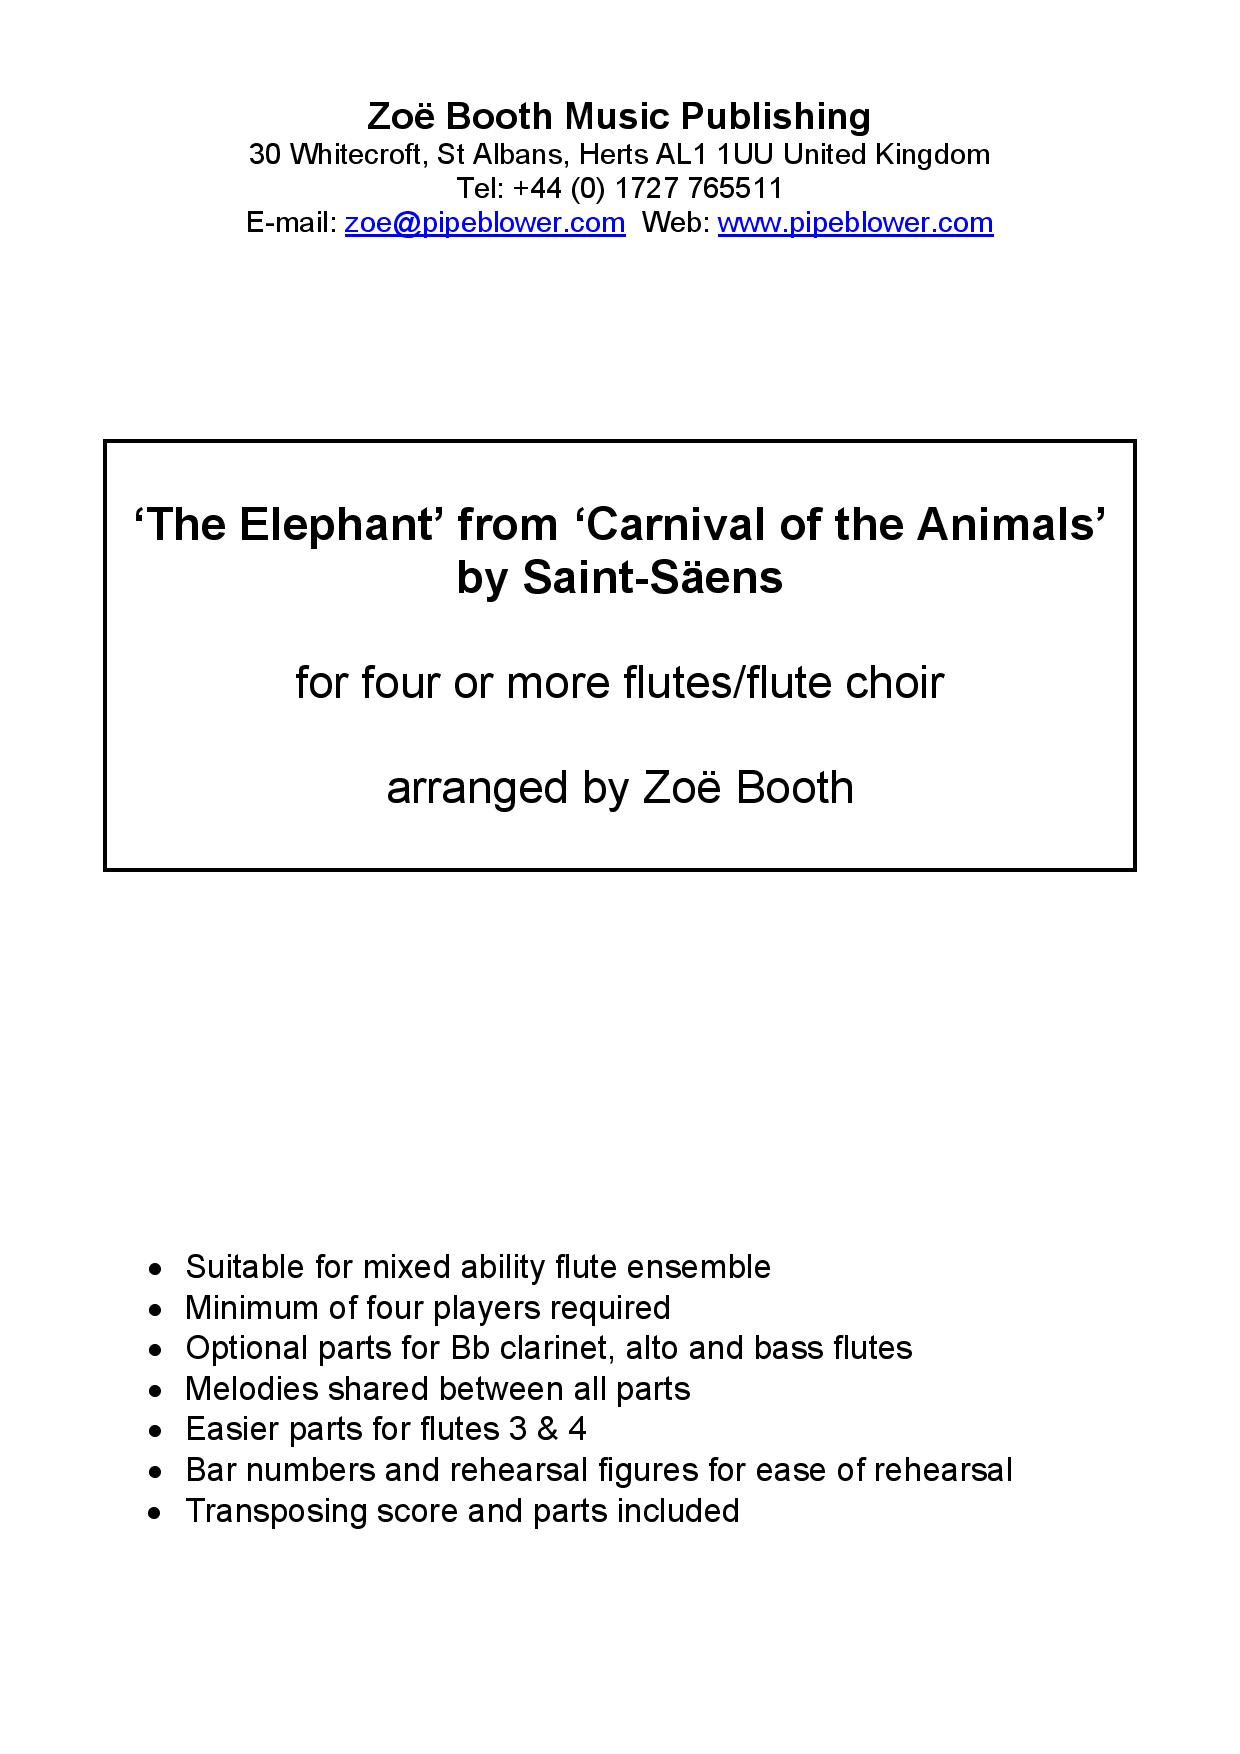 The Elephant by Saint-Saëns  arranged by Zoë Booth for four or more flutes/flute choir